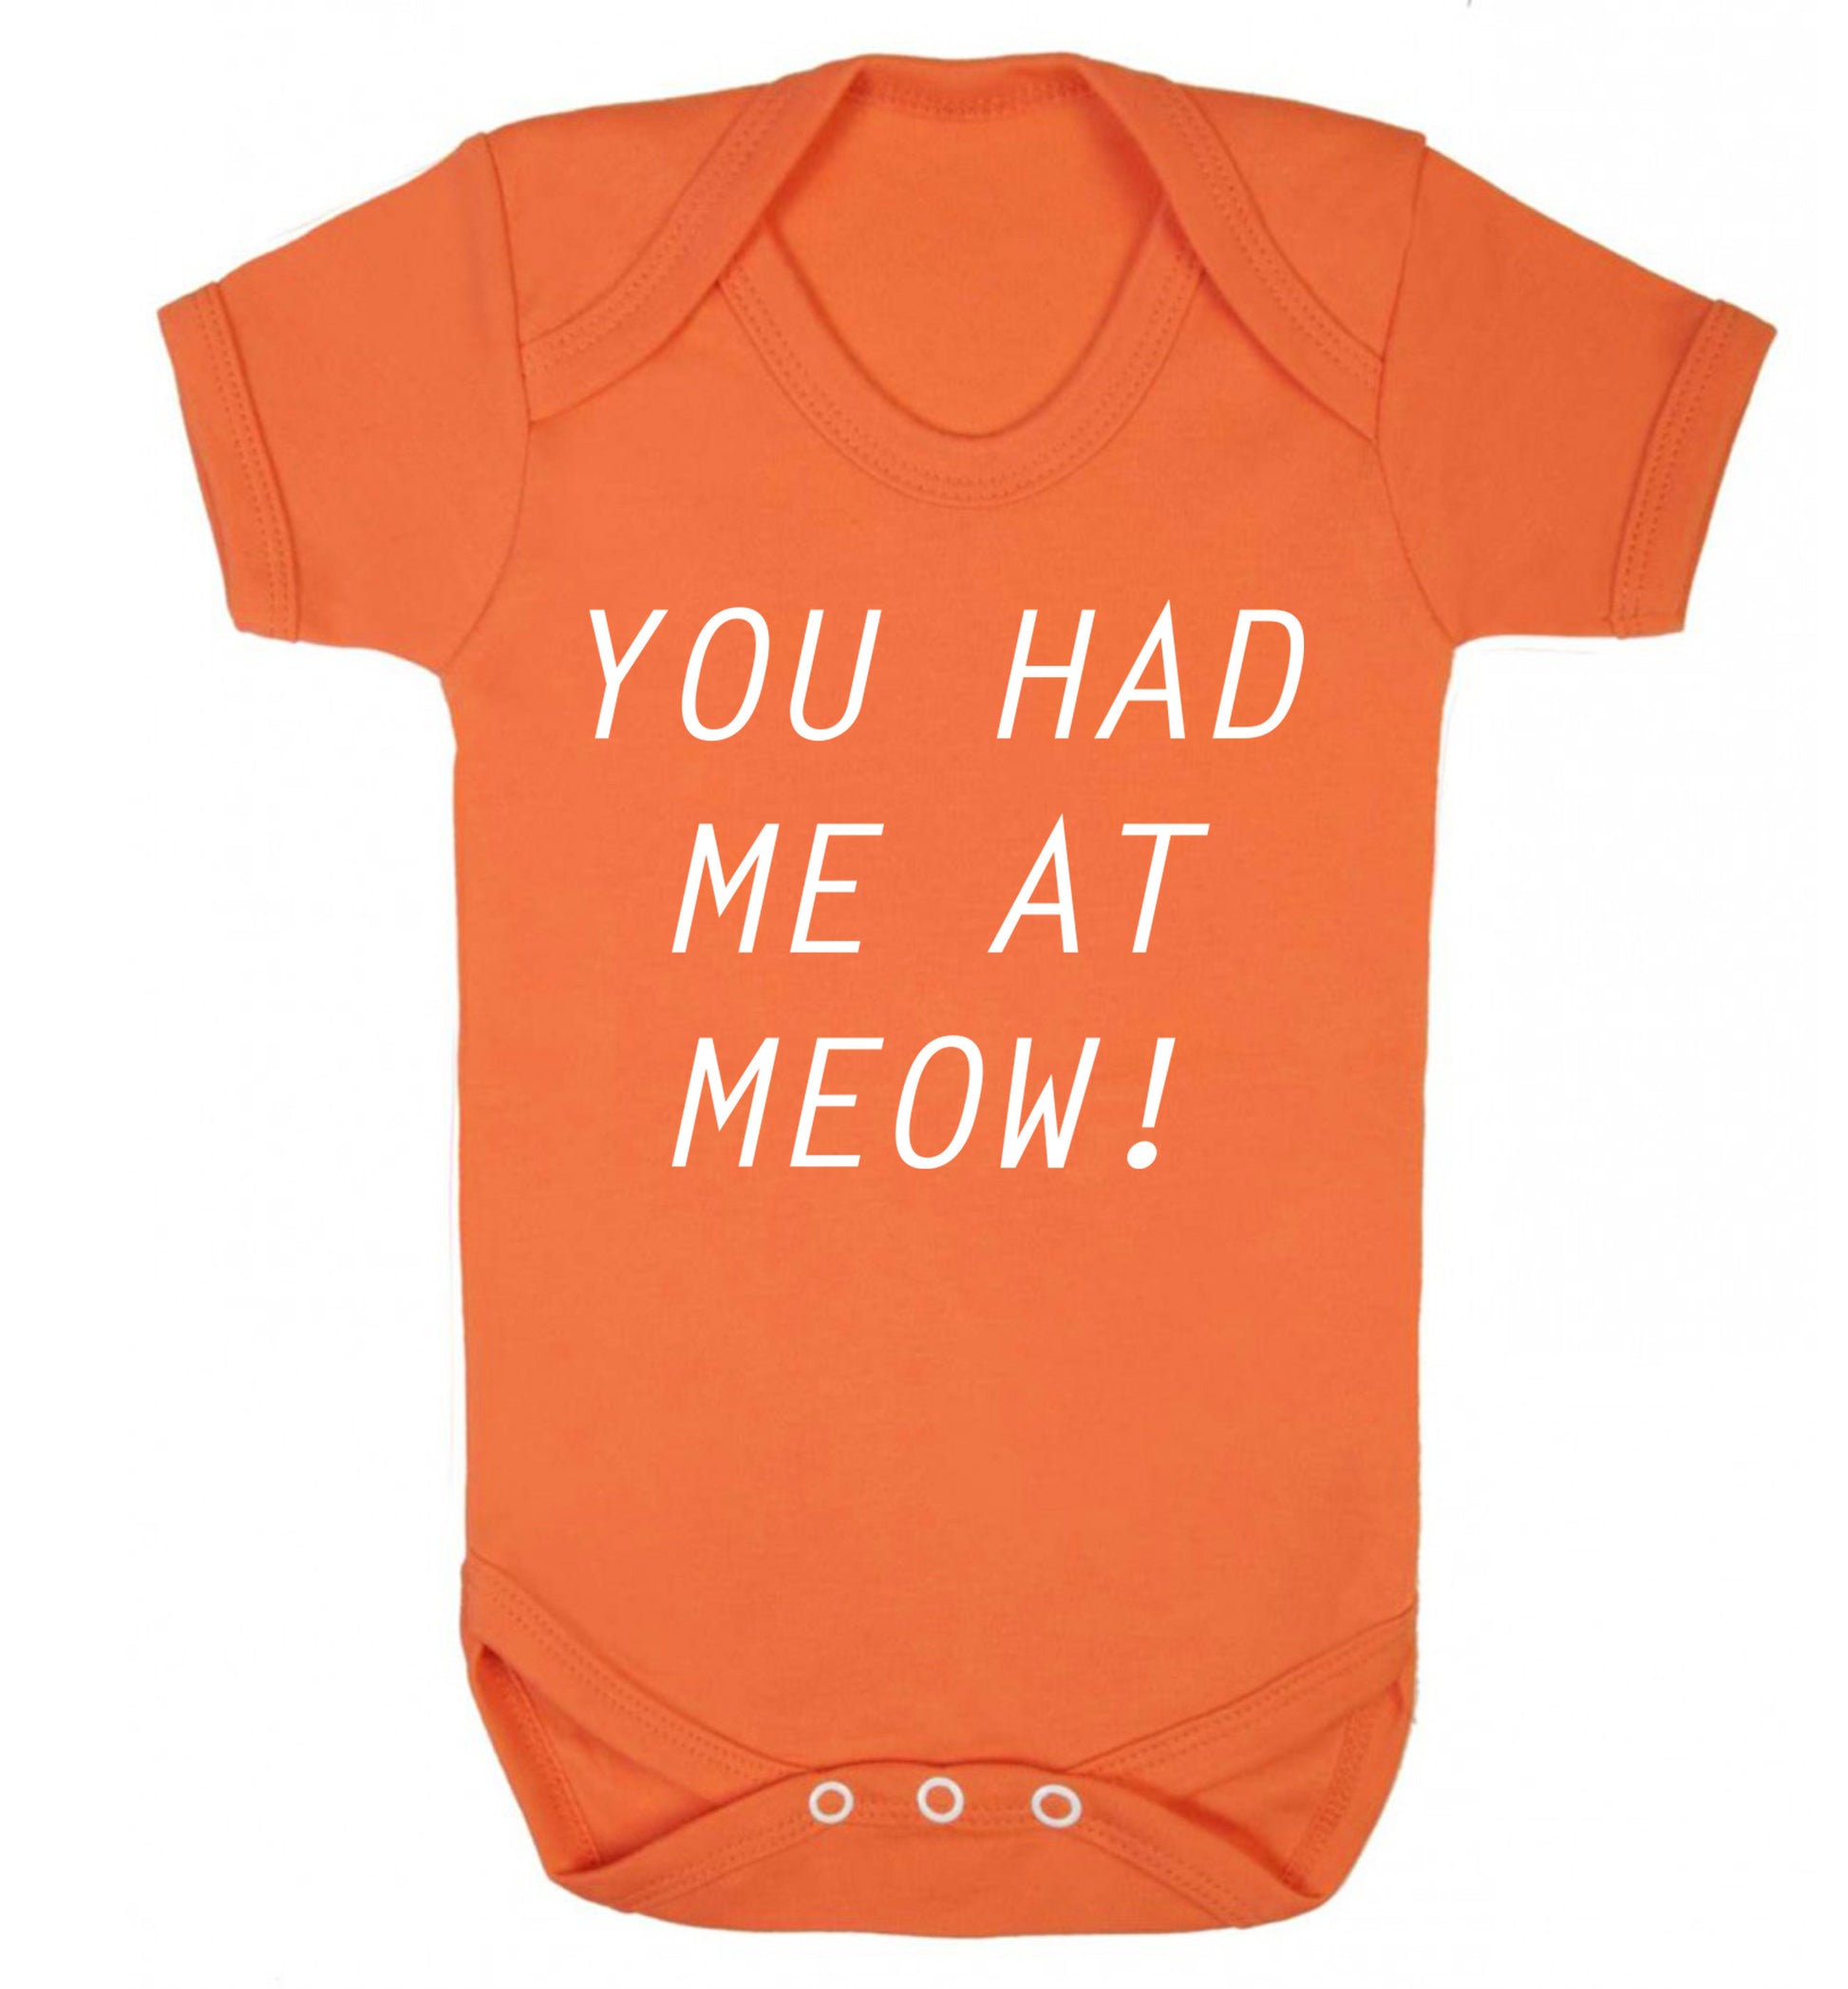 You had me at meow Baby Vest orange 18-24 months